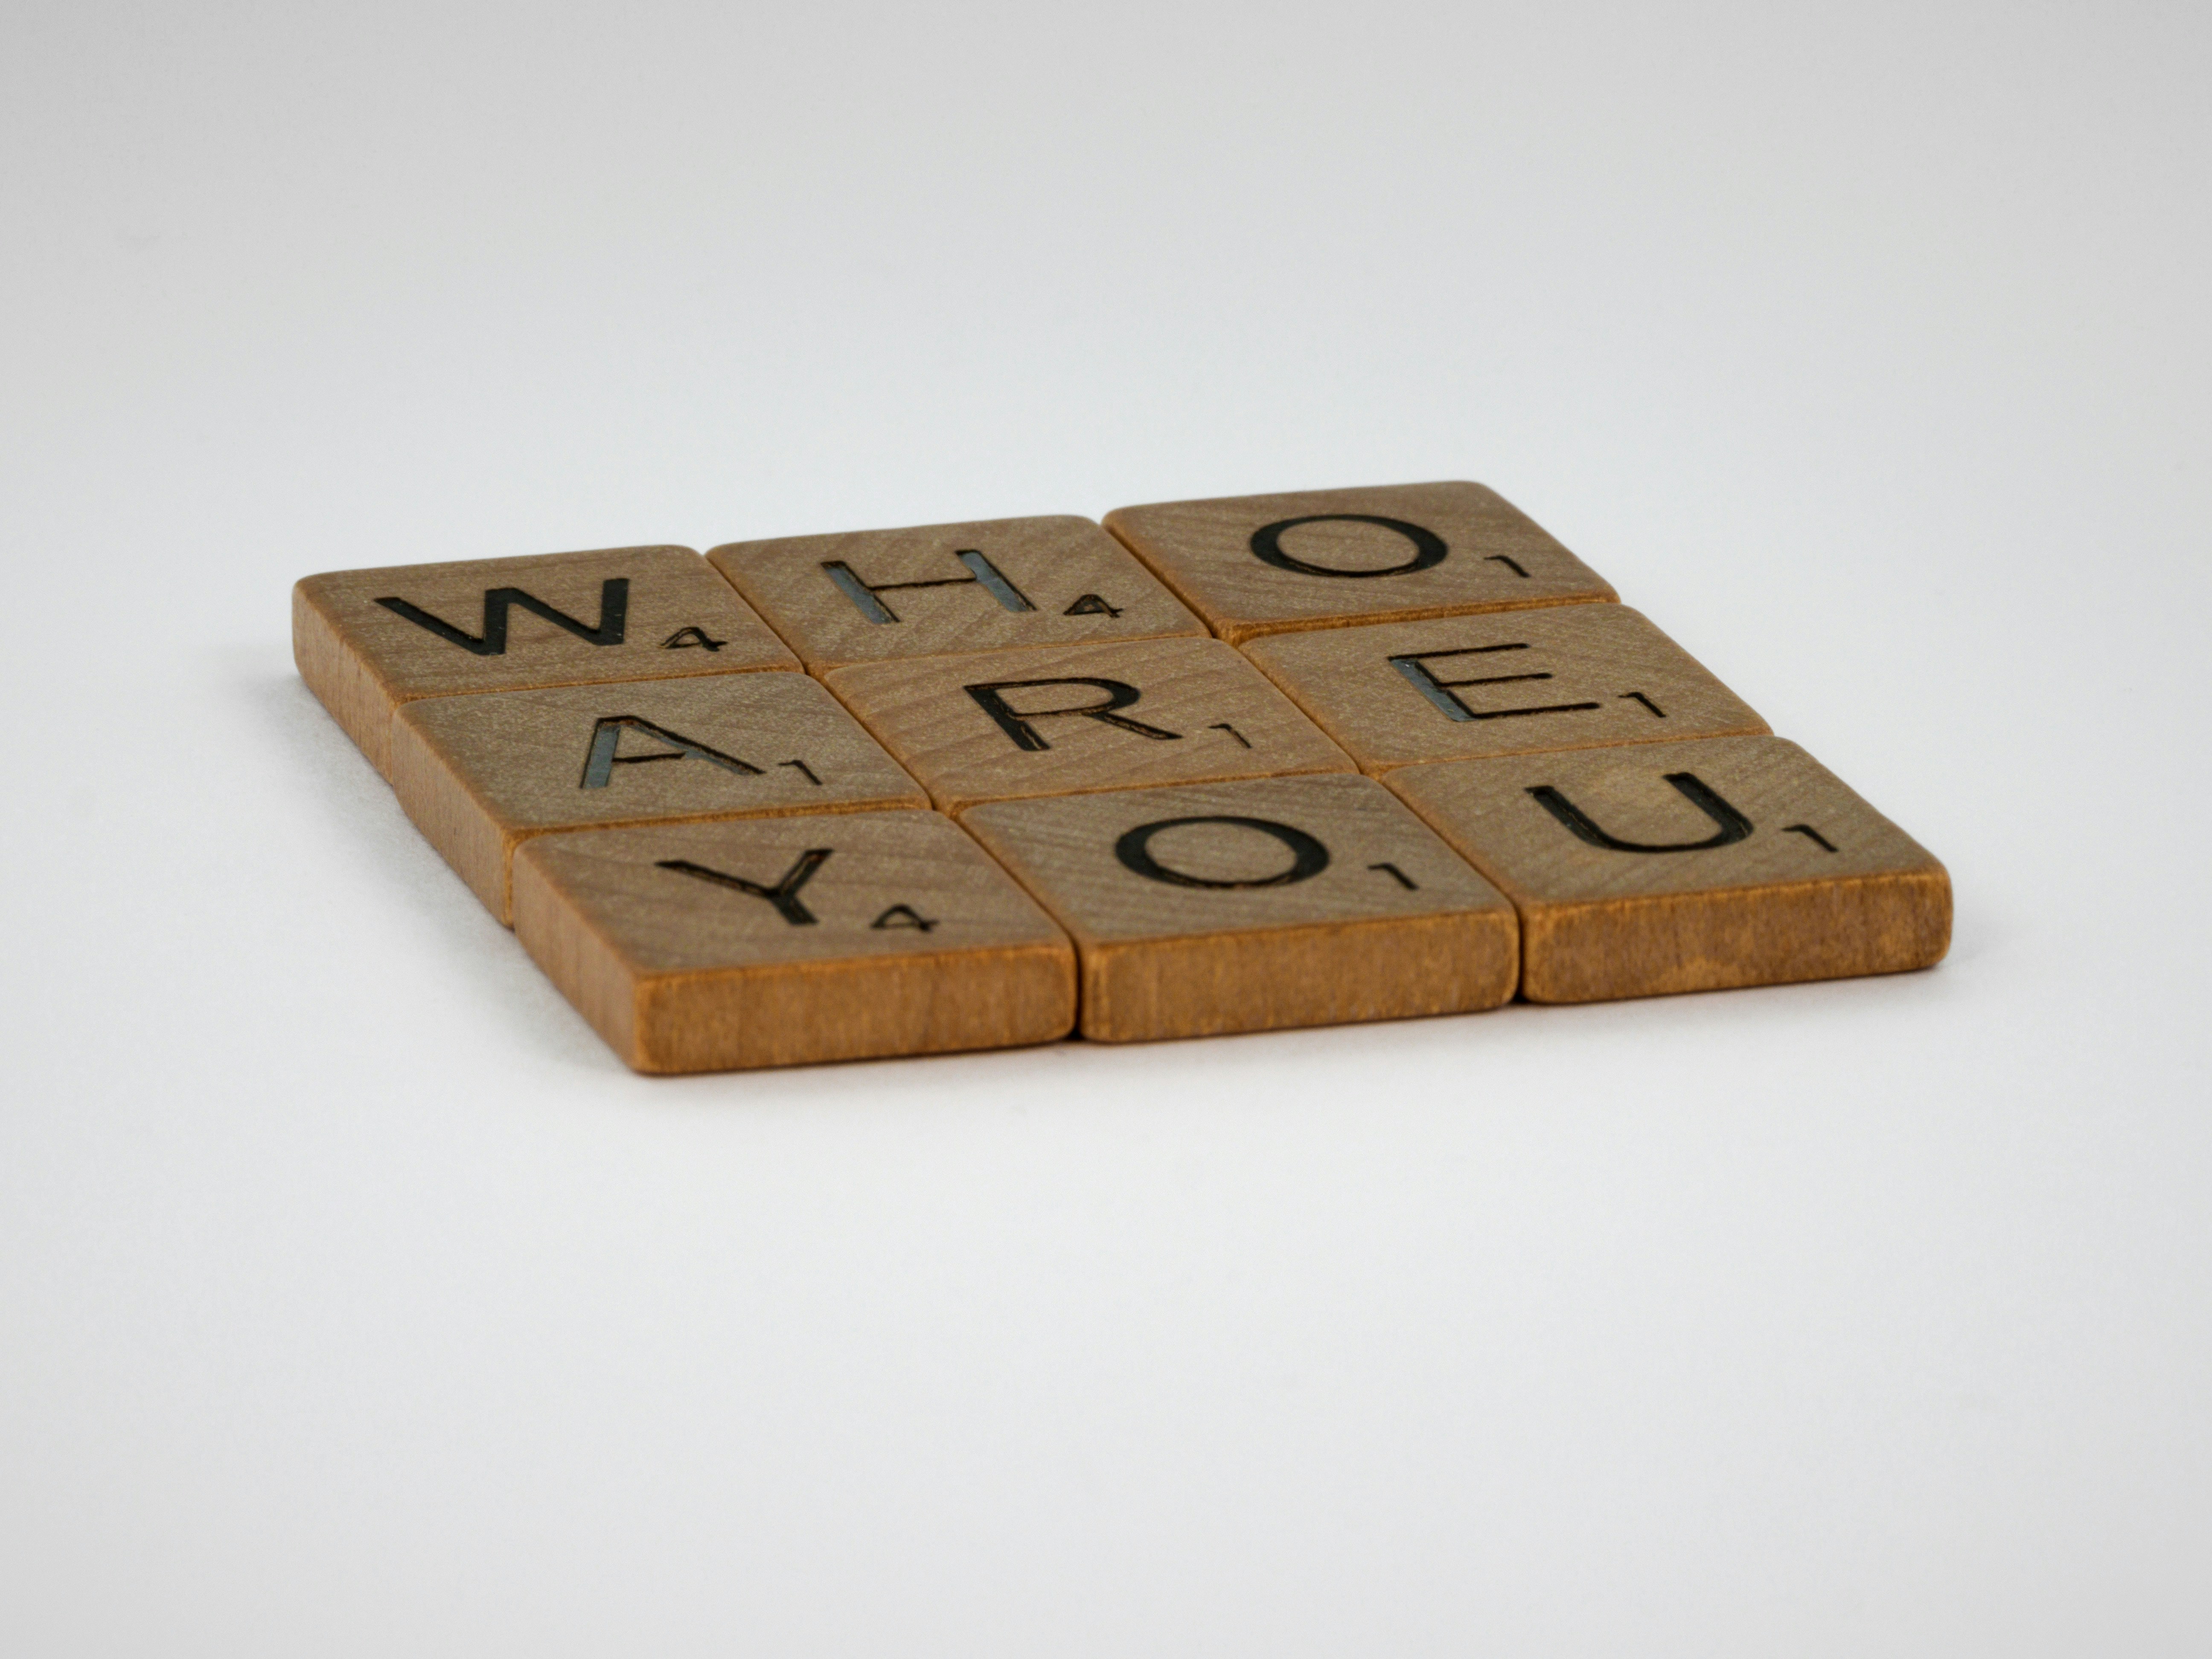 scrabble, scrabble pieces, lettering, letters, wood, scrabble tiles, white background, words, quote, letters, type, typography, design, layout, focus, bokeh, blur, photography, images, image, self-image, self-awareness, mediate, identity, identity crisis, self help, find yourself, finding yourself, understanding, therapy, mindfulness, roots, personality, authenticity, honesty, principles, id, ego, psychiatry, philosophy,